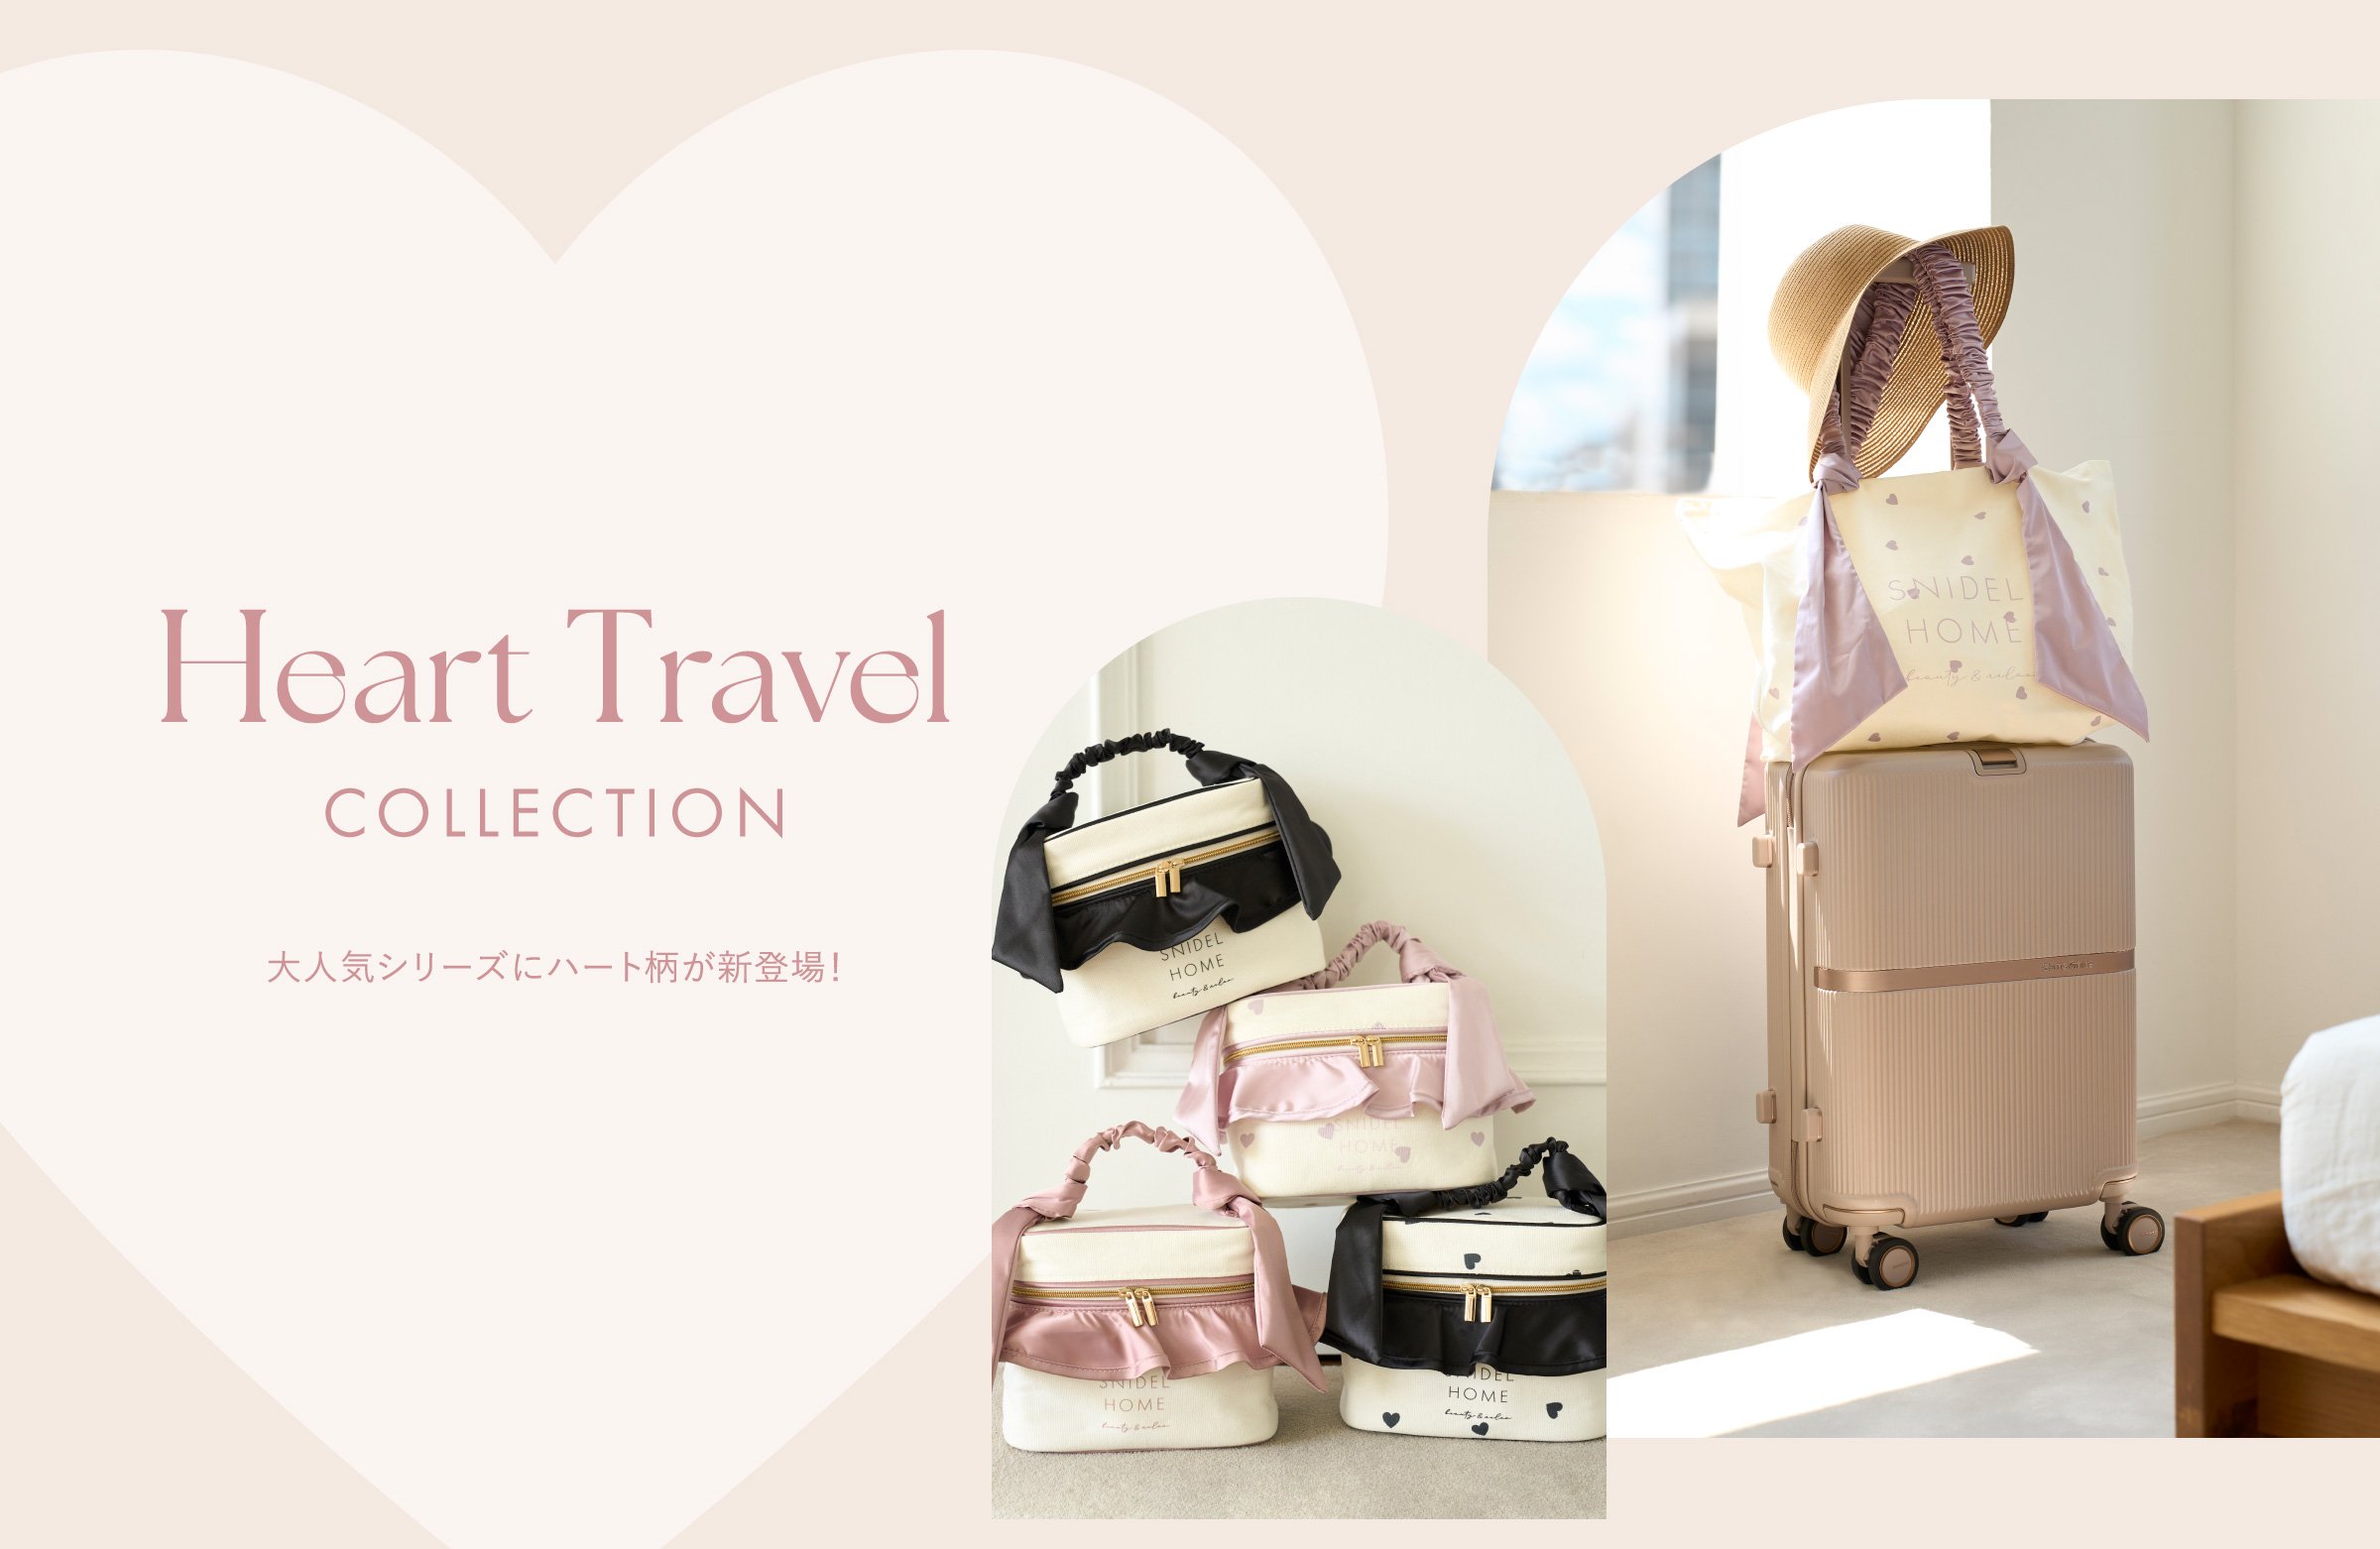 Heart Travel COLLECTION